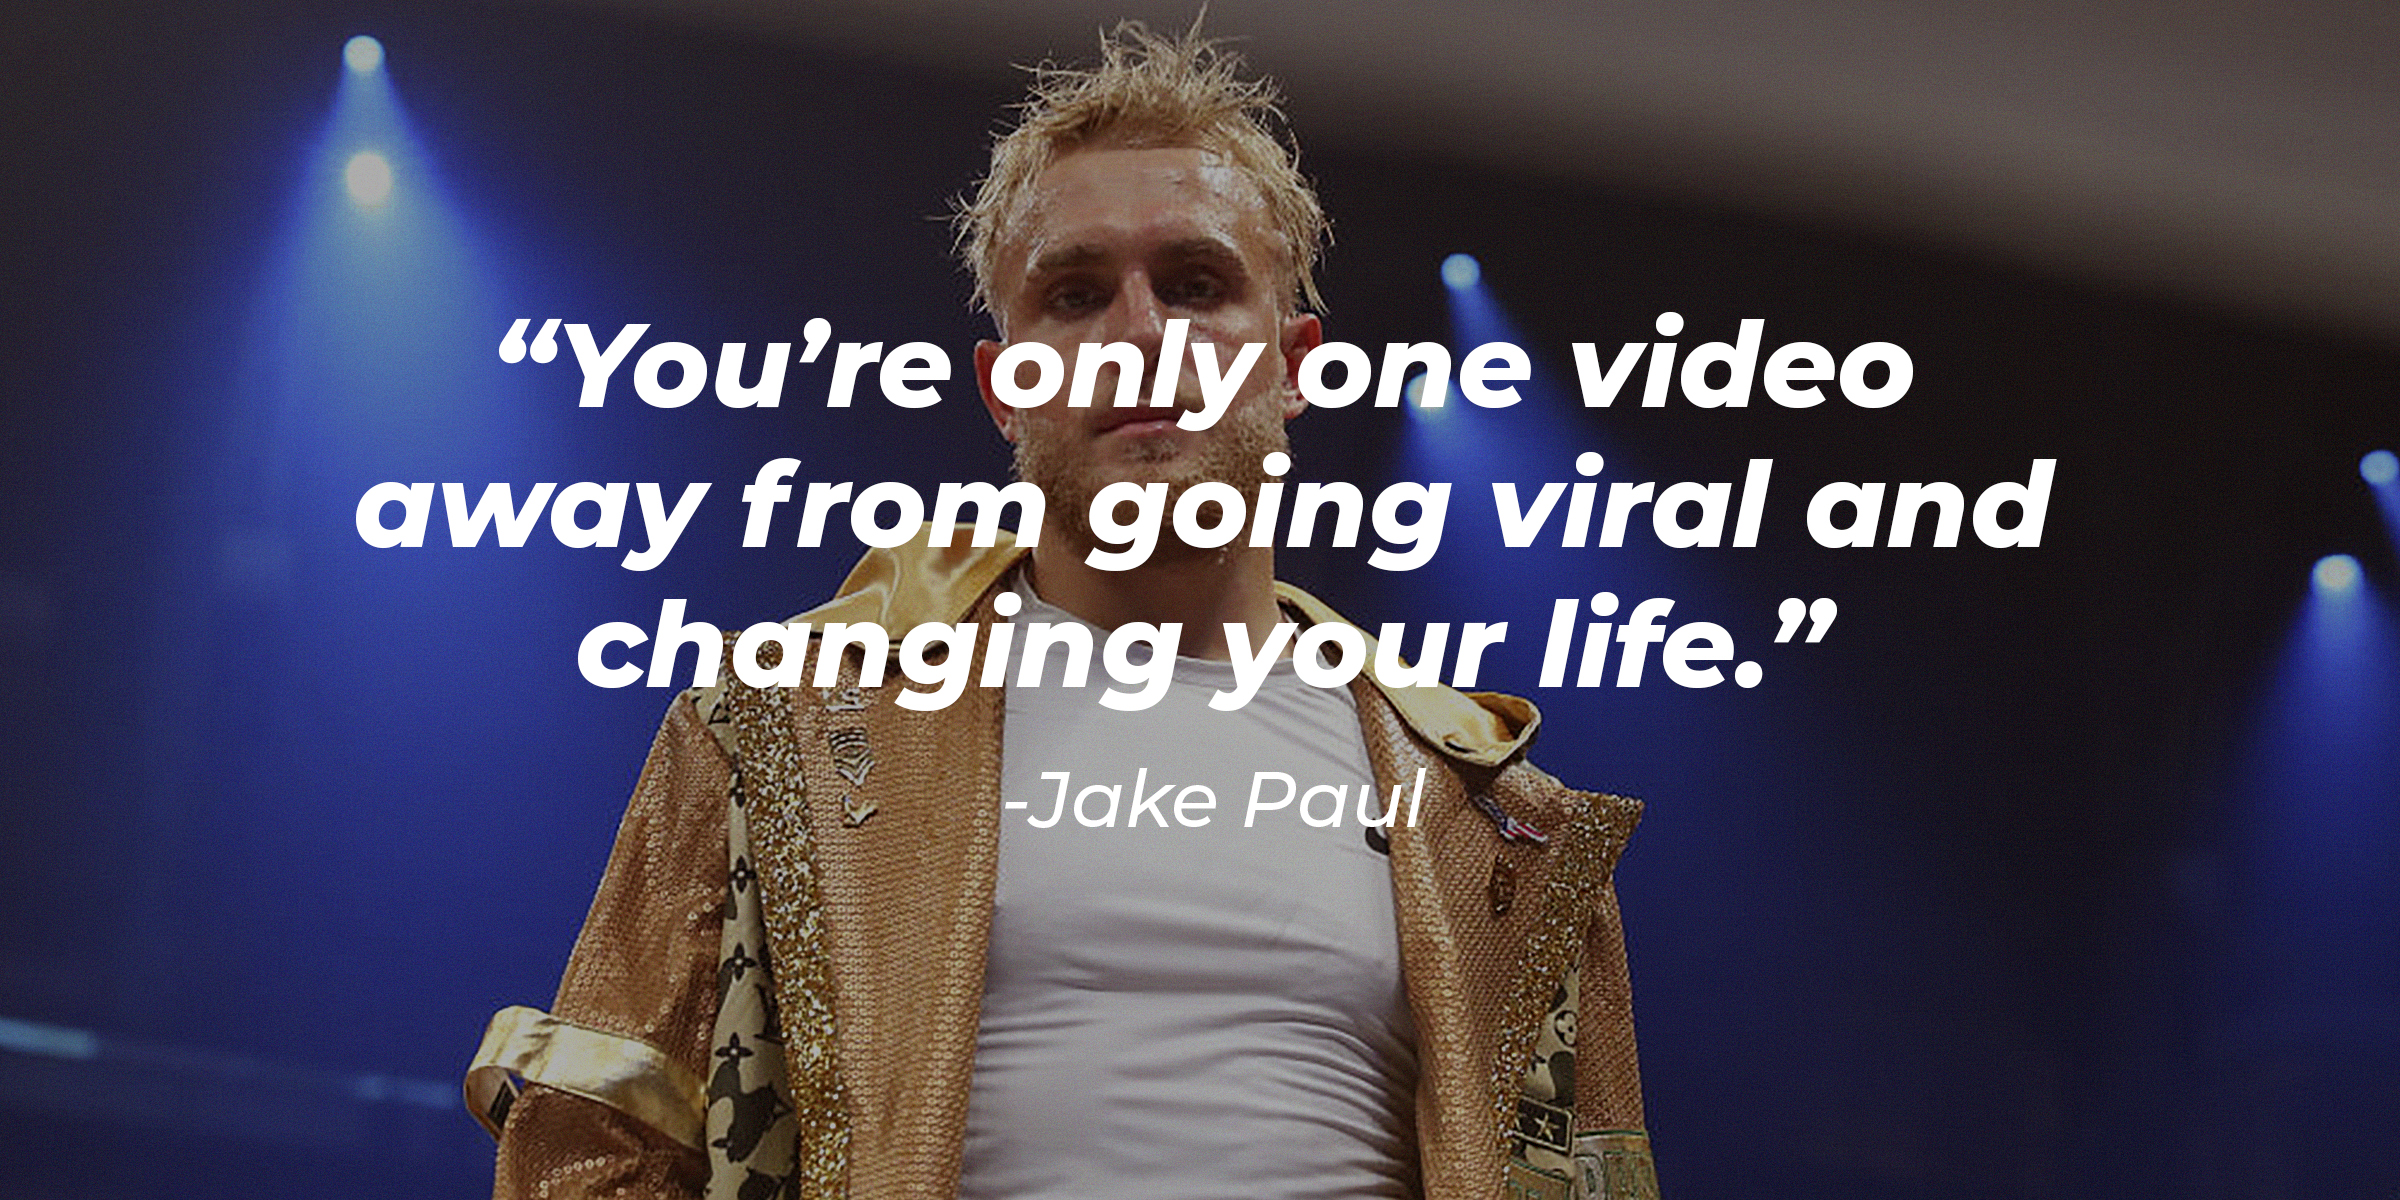 Jake Paul’s quote: “You’re only one video away from going viral and changing your life.” | Image: Getty Images